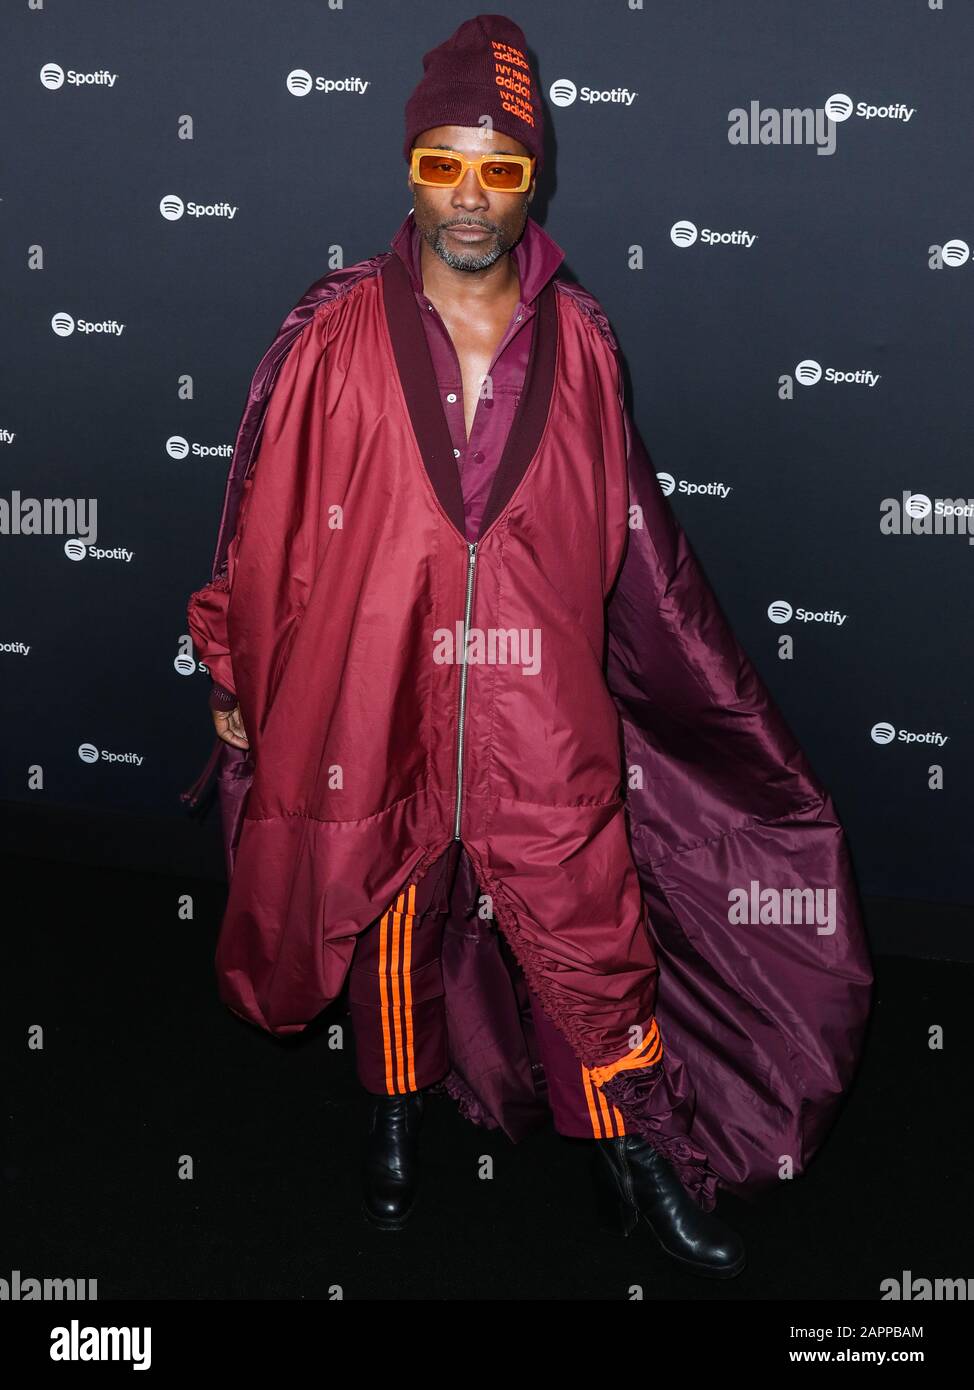 WEST HOLLYWOOD, LOS ANGELES, CALIFORNIA, USA - JANUARY 23: Billy Porter wearing Adidas x Ivy Park arrives at the Spotify Best New Artist 2020 Party held at The Lot Studios on January 23, 2020 in West Hollywood, Los Angeles, California, United States. (Photo by Xavier Collin/Image Press Agency) Stock Photo